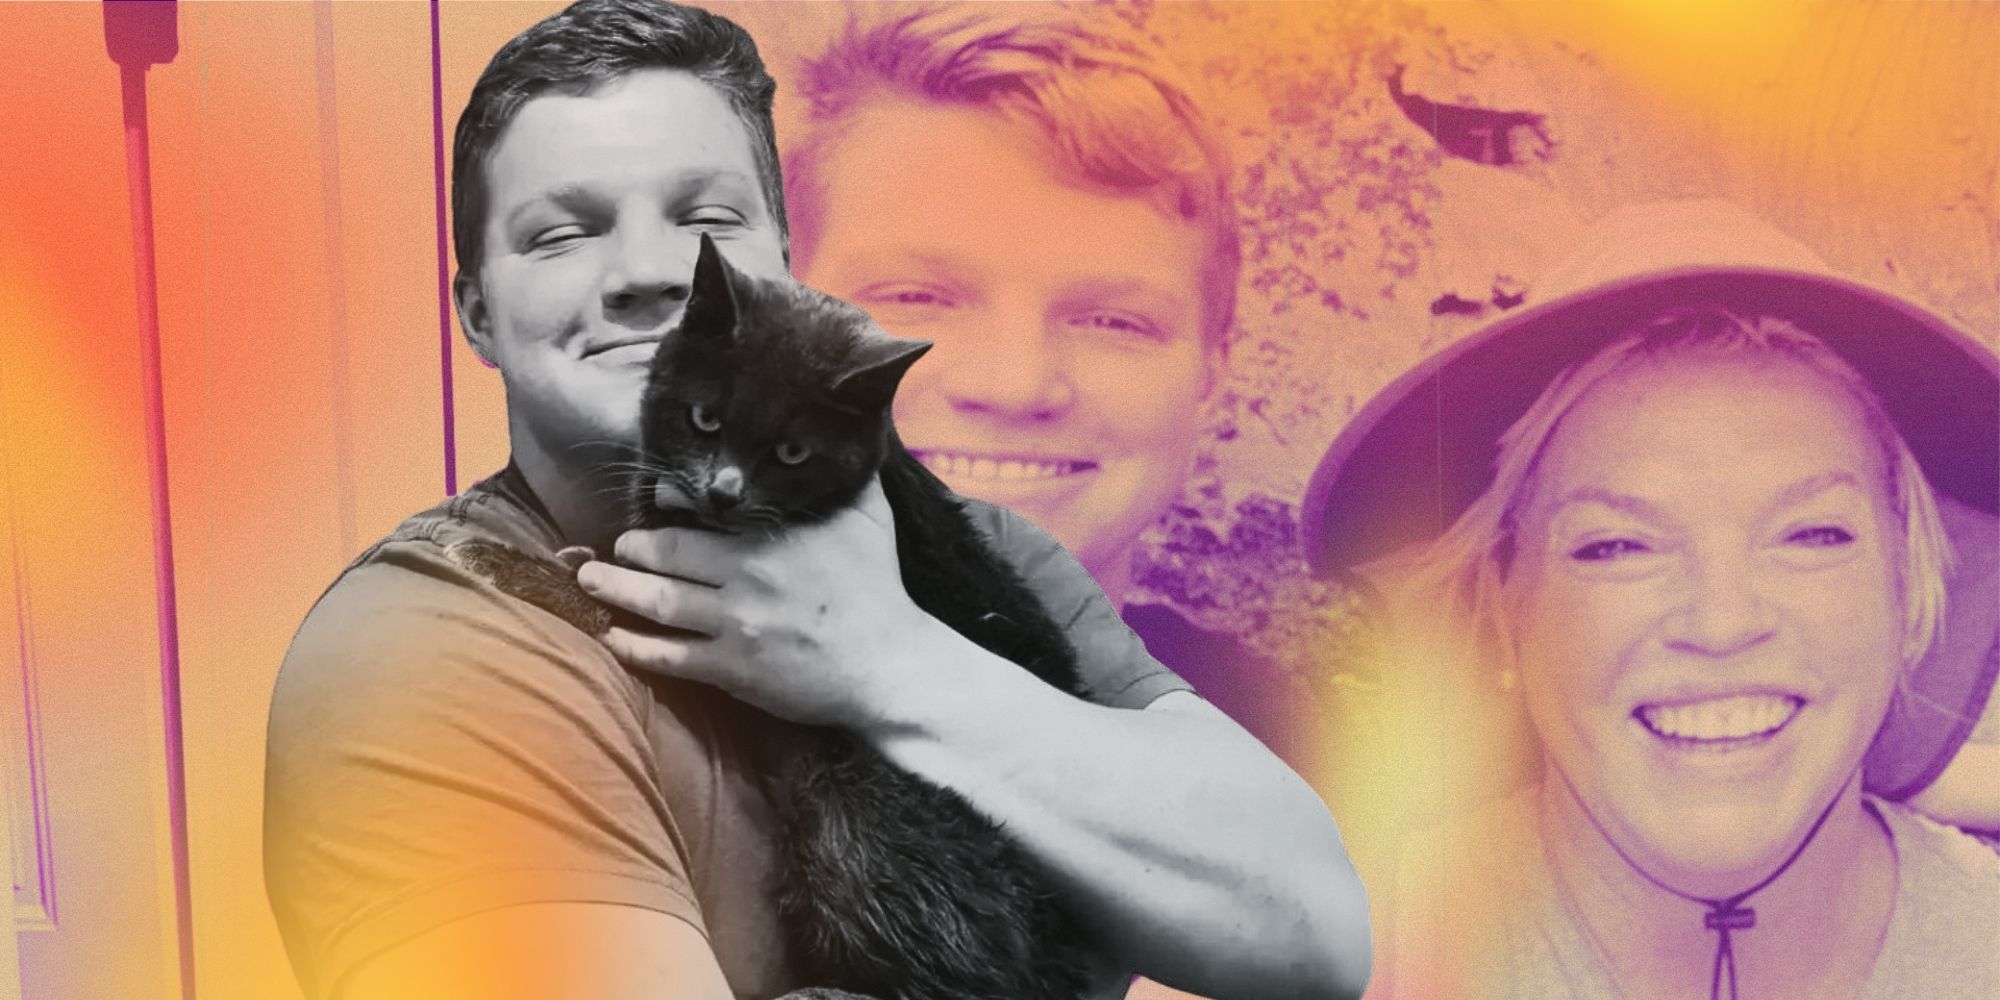 Montage of Sister Wives' Garrison and Janelle Brown, with Garrison holding a black cat